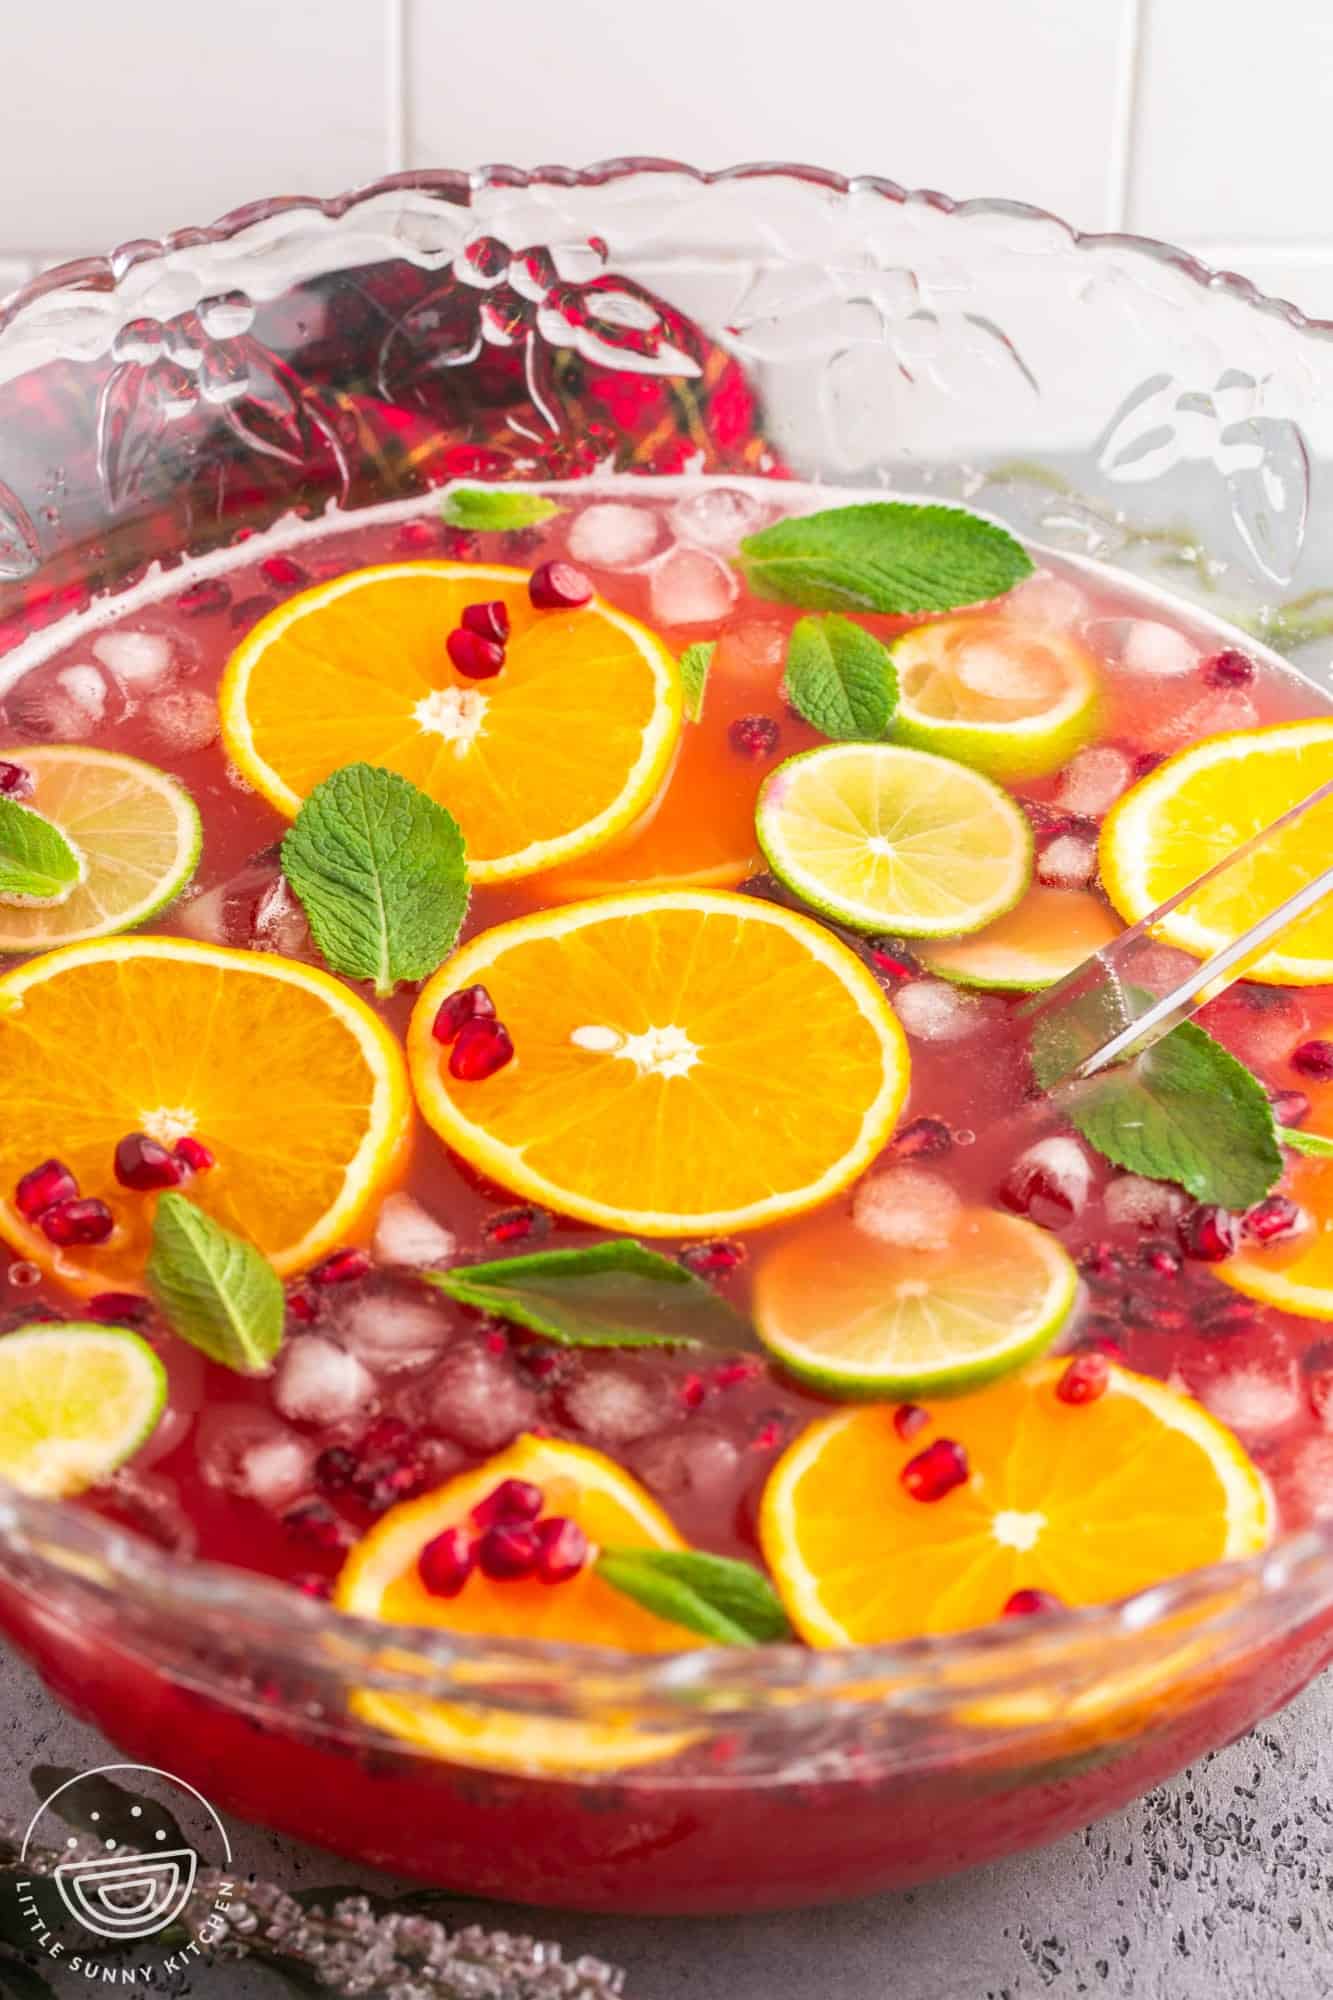 A bowl of cranberry punch with orange slices, pomegranate seeds, ice, and mint leaves.